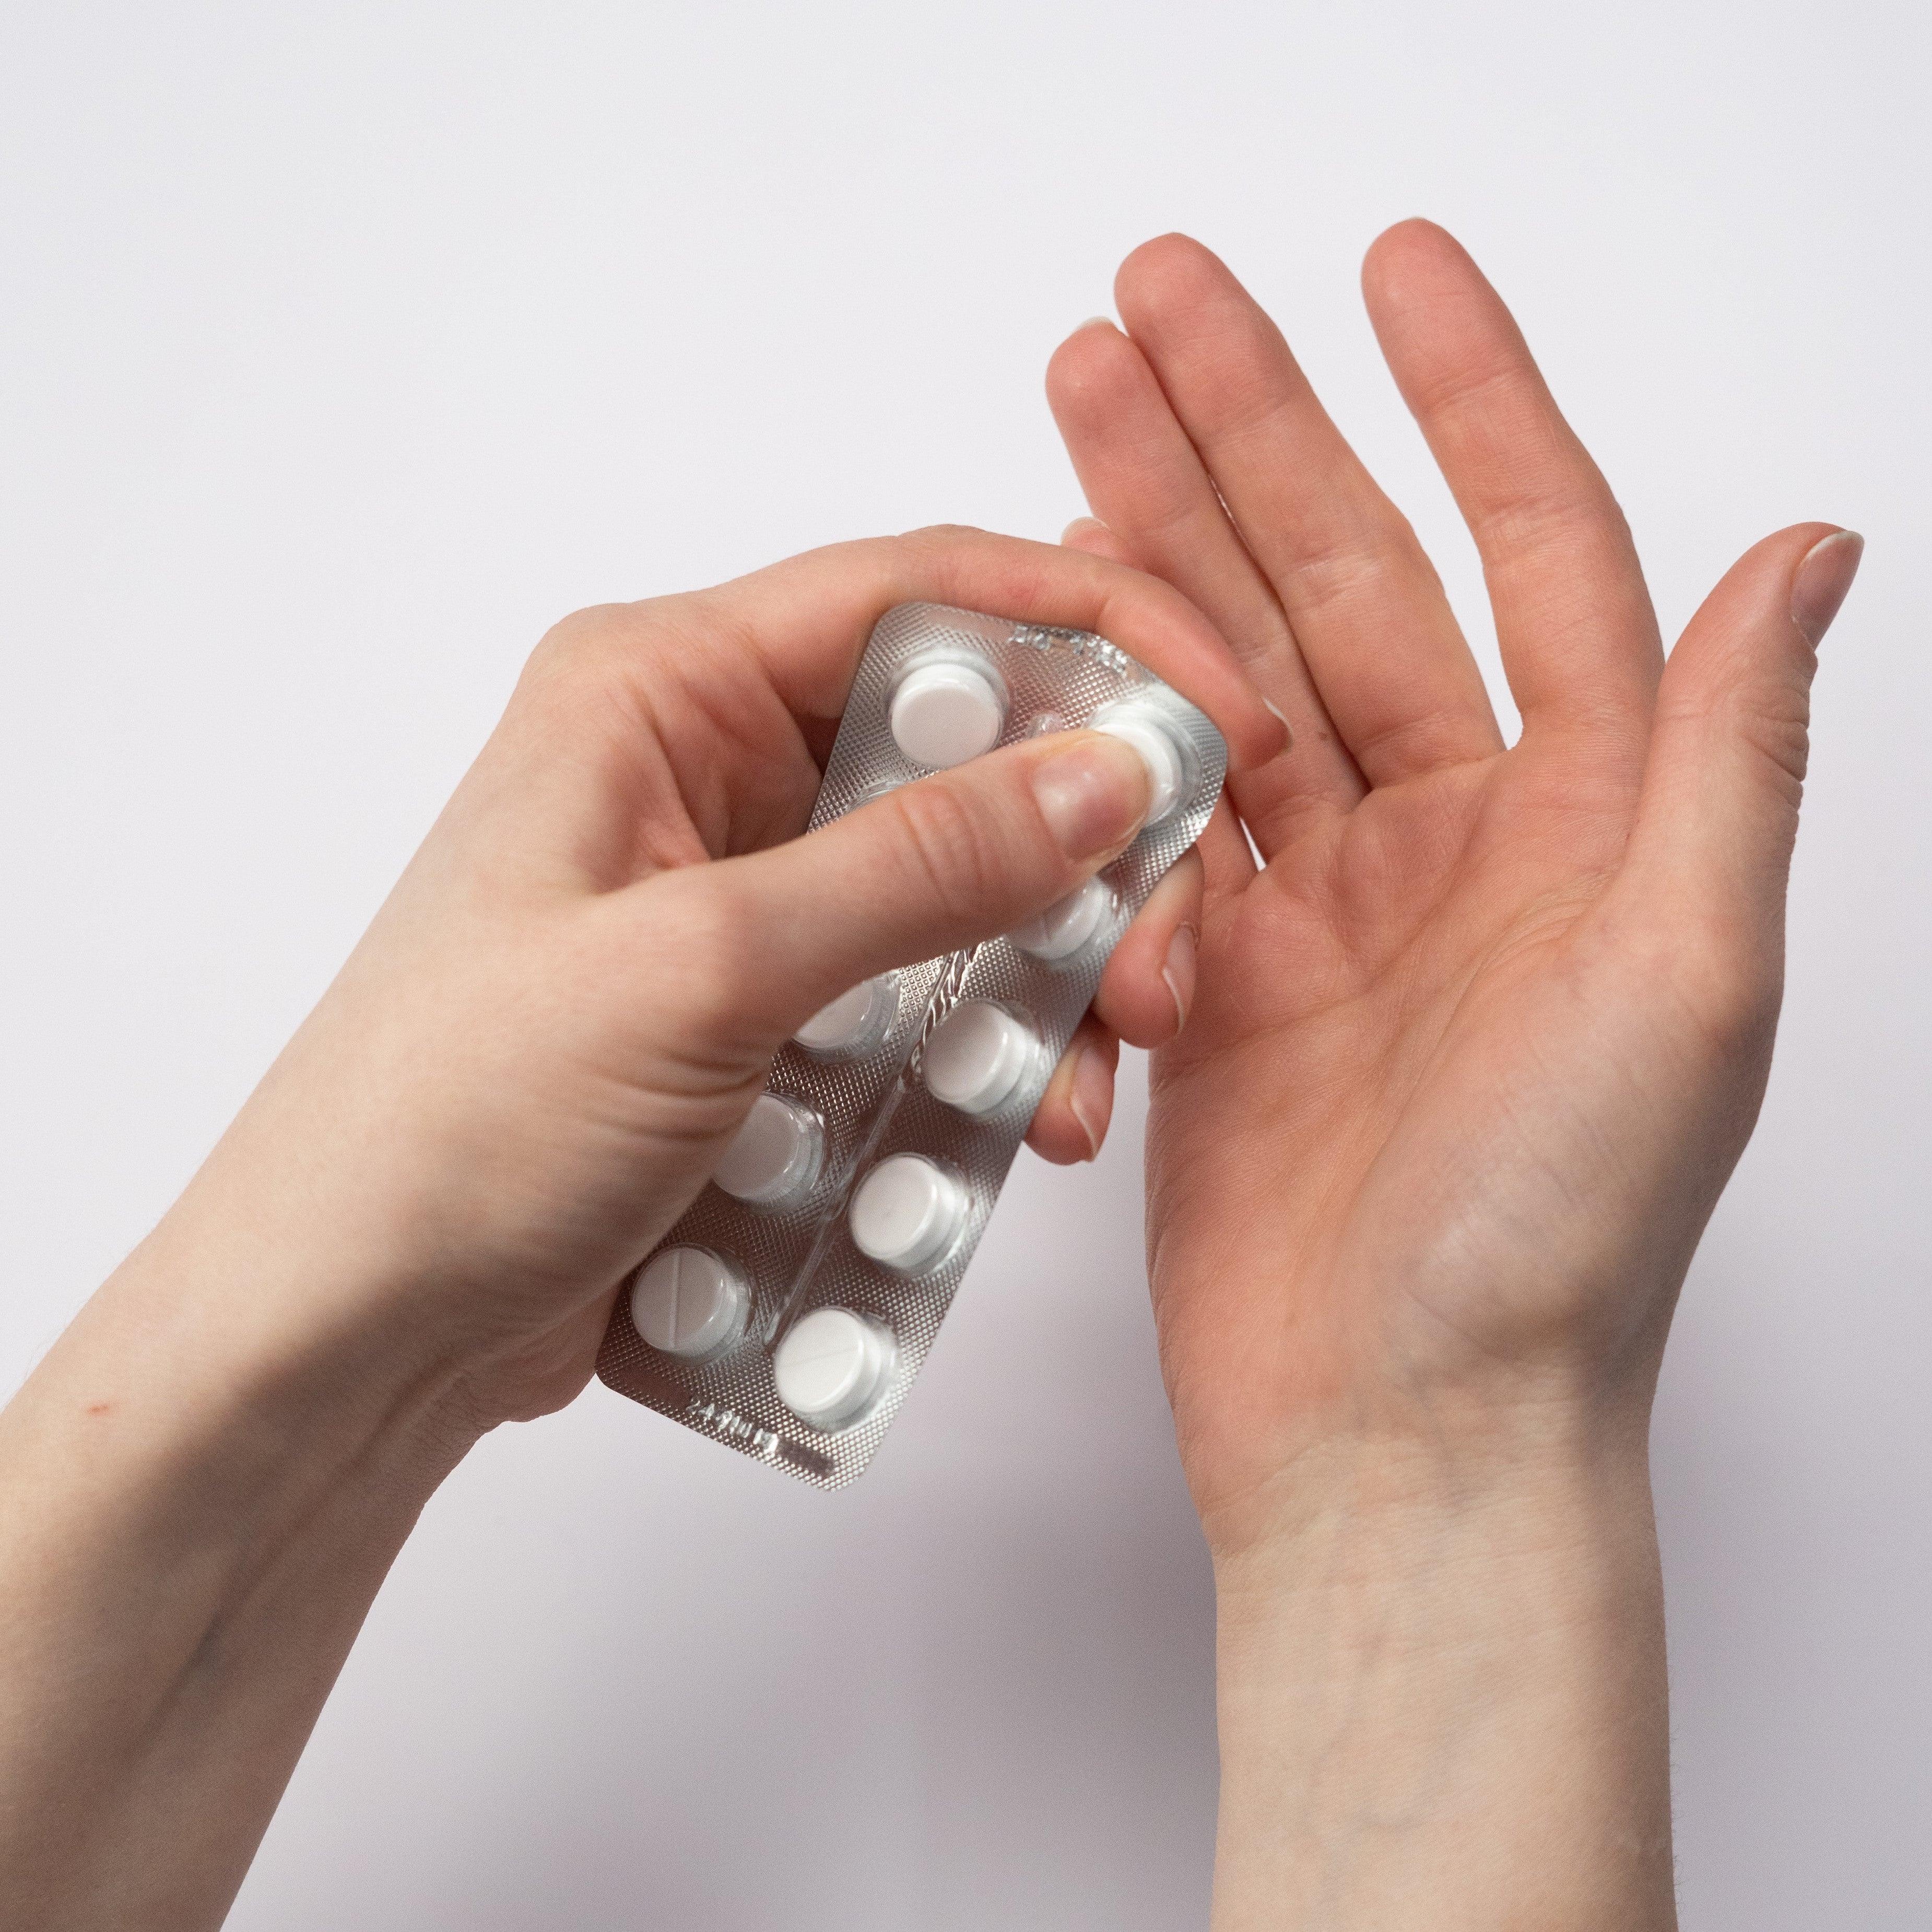 Ritalin and Adderall side effects and alternatives – NutriMagic USA